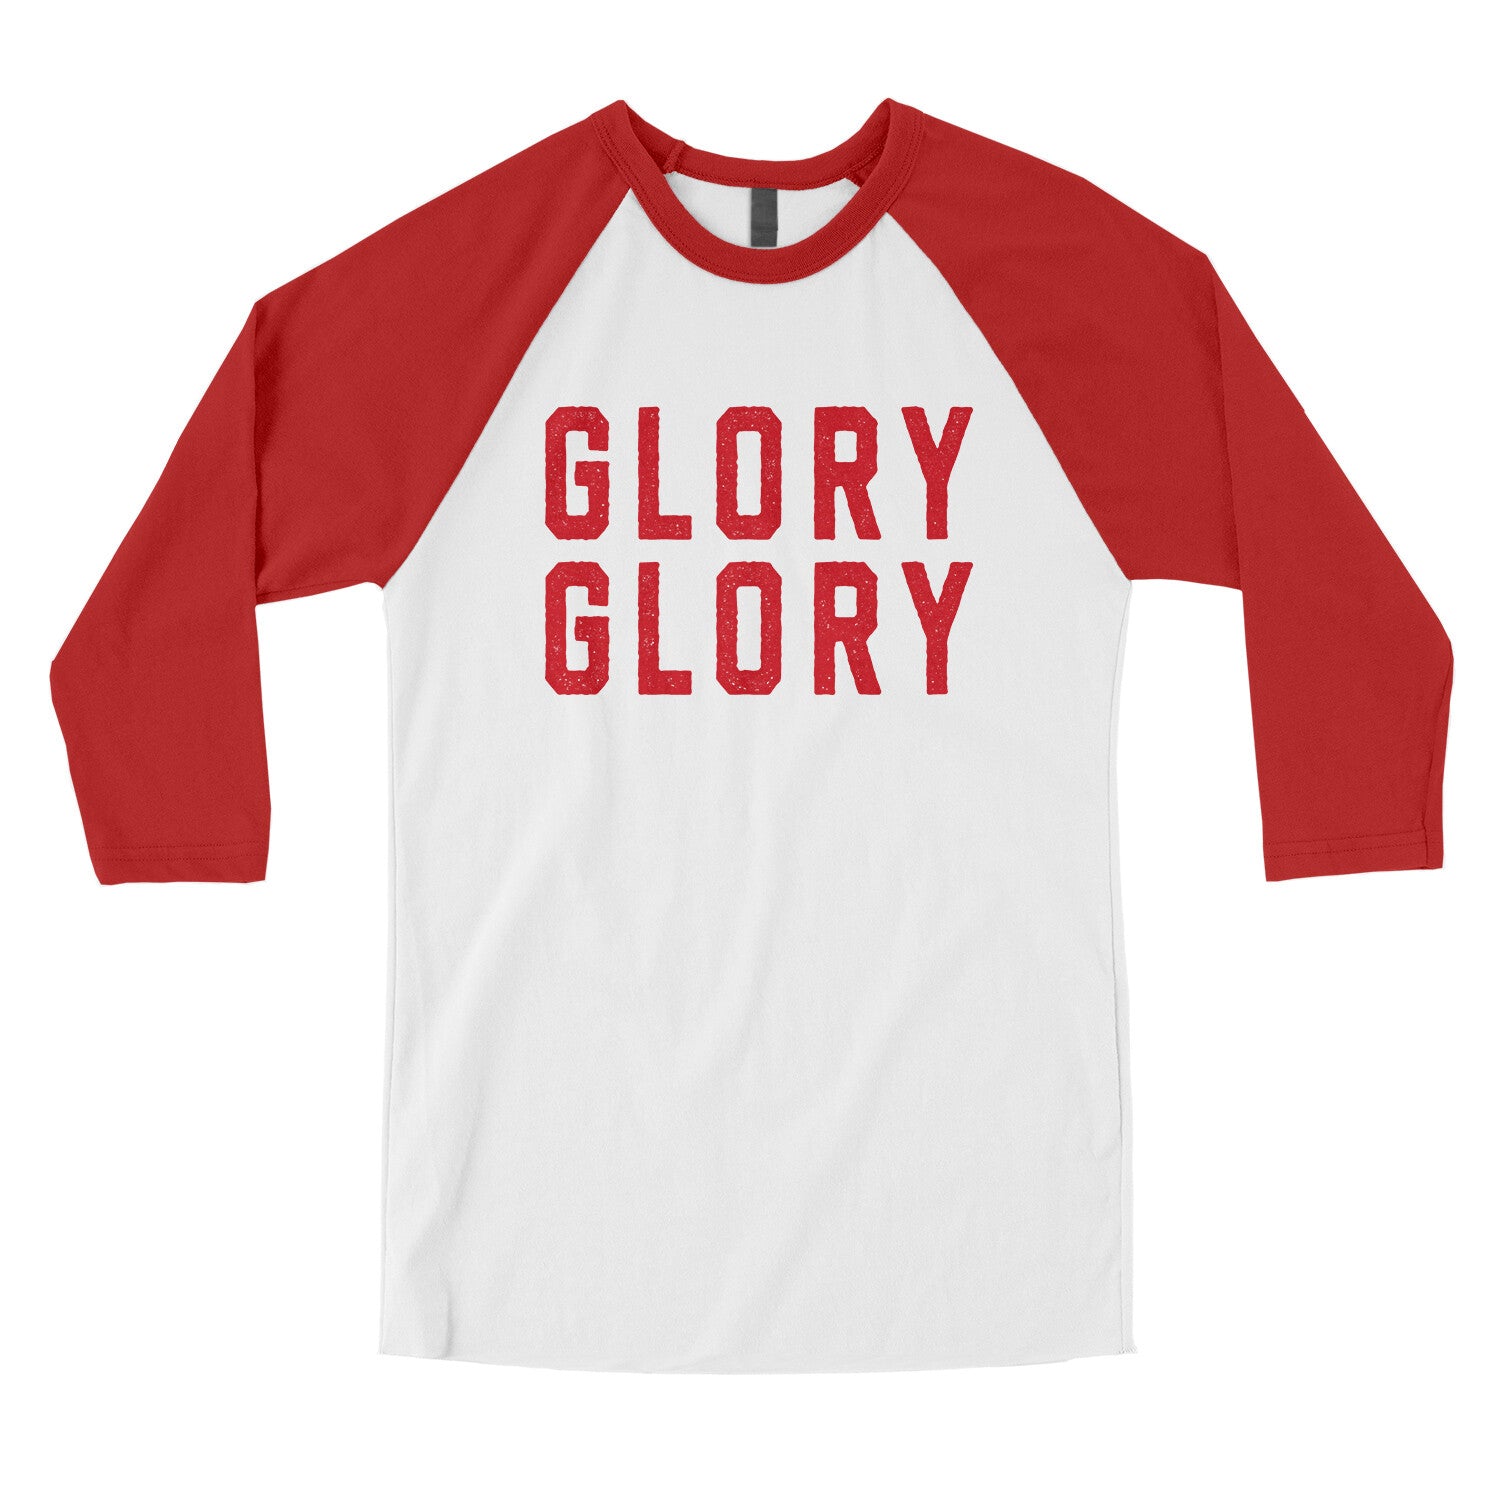 Glory Glory in White with Red Color